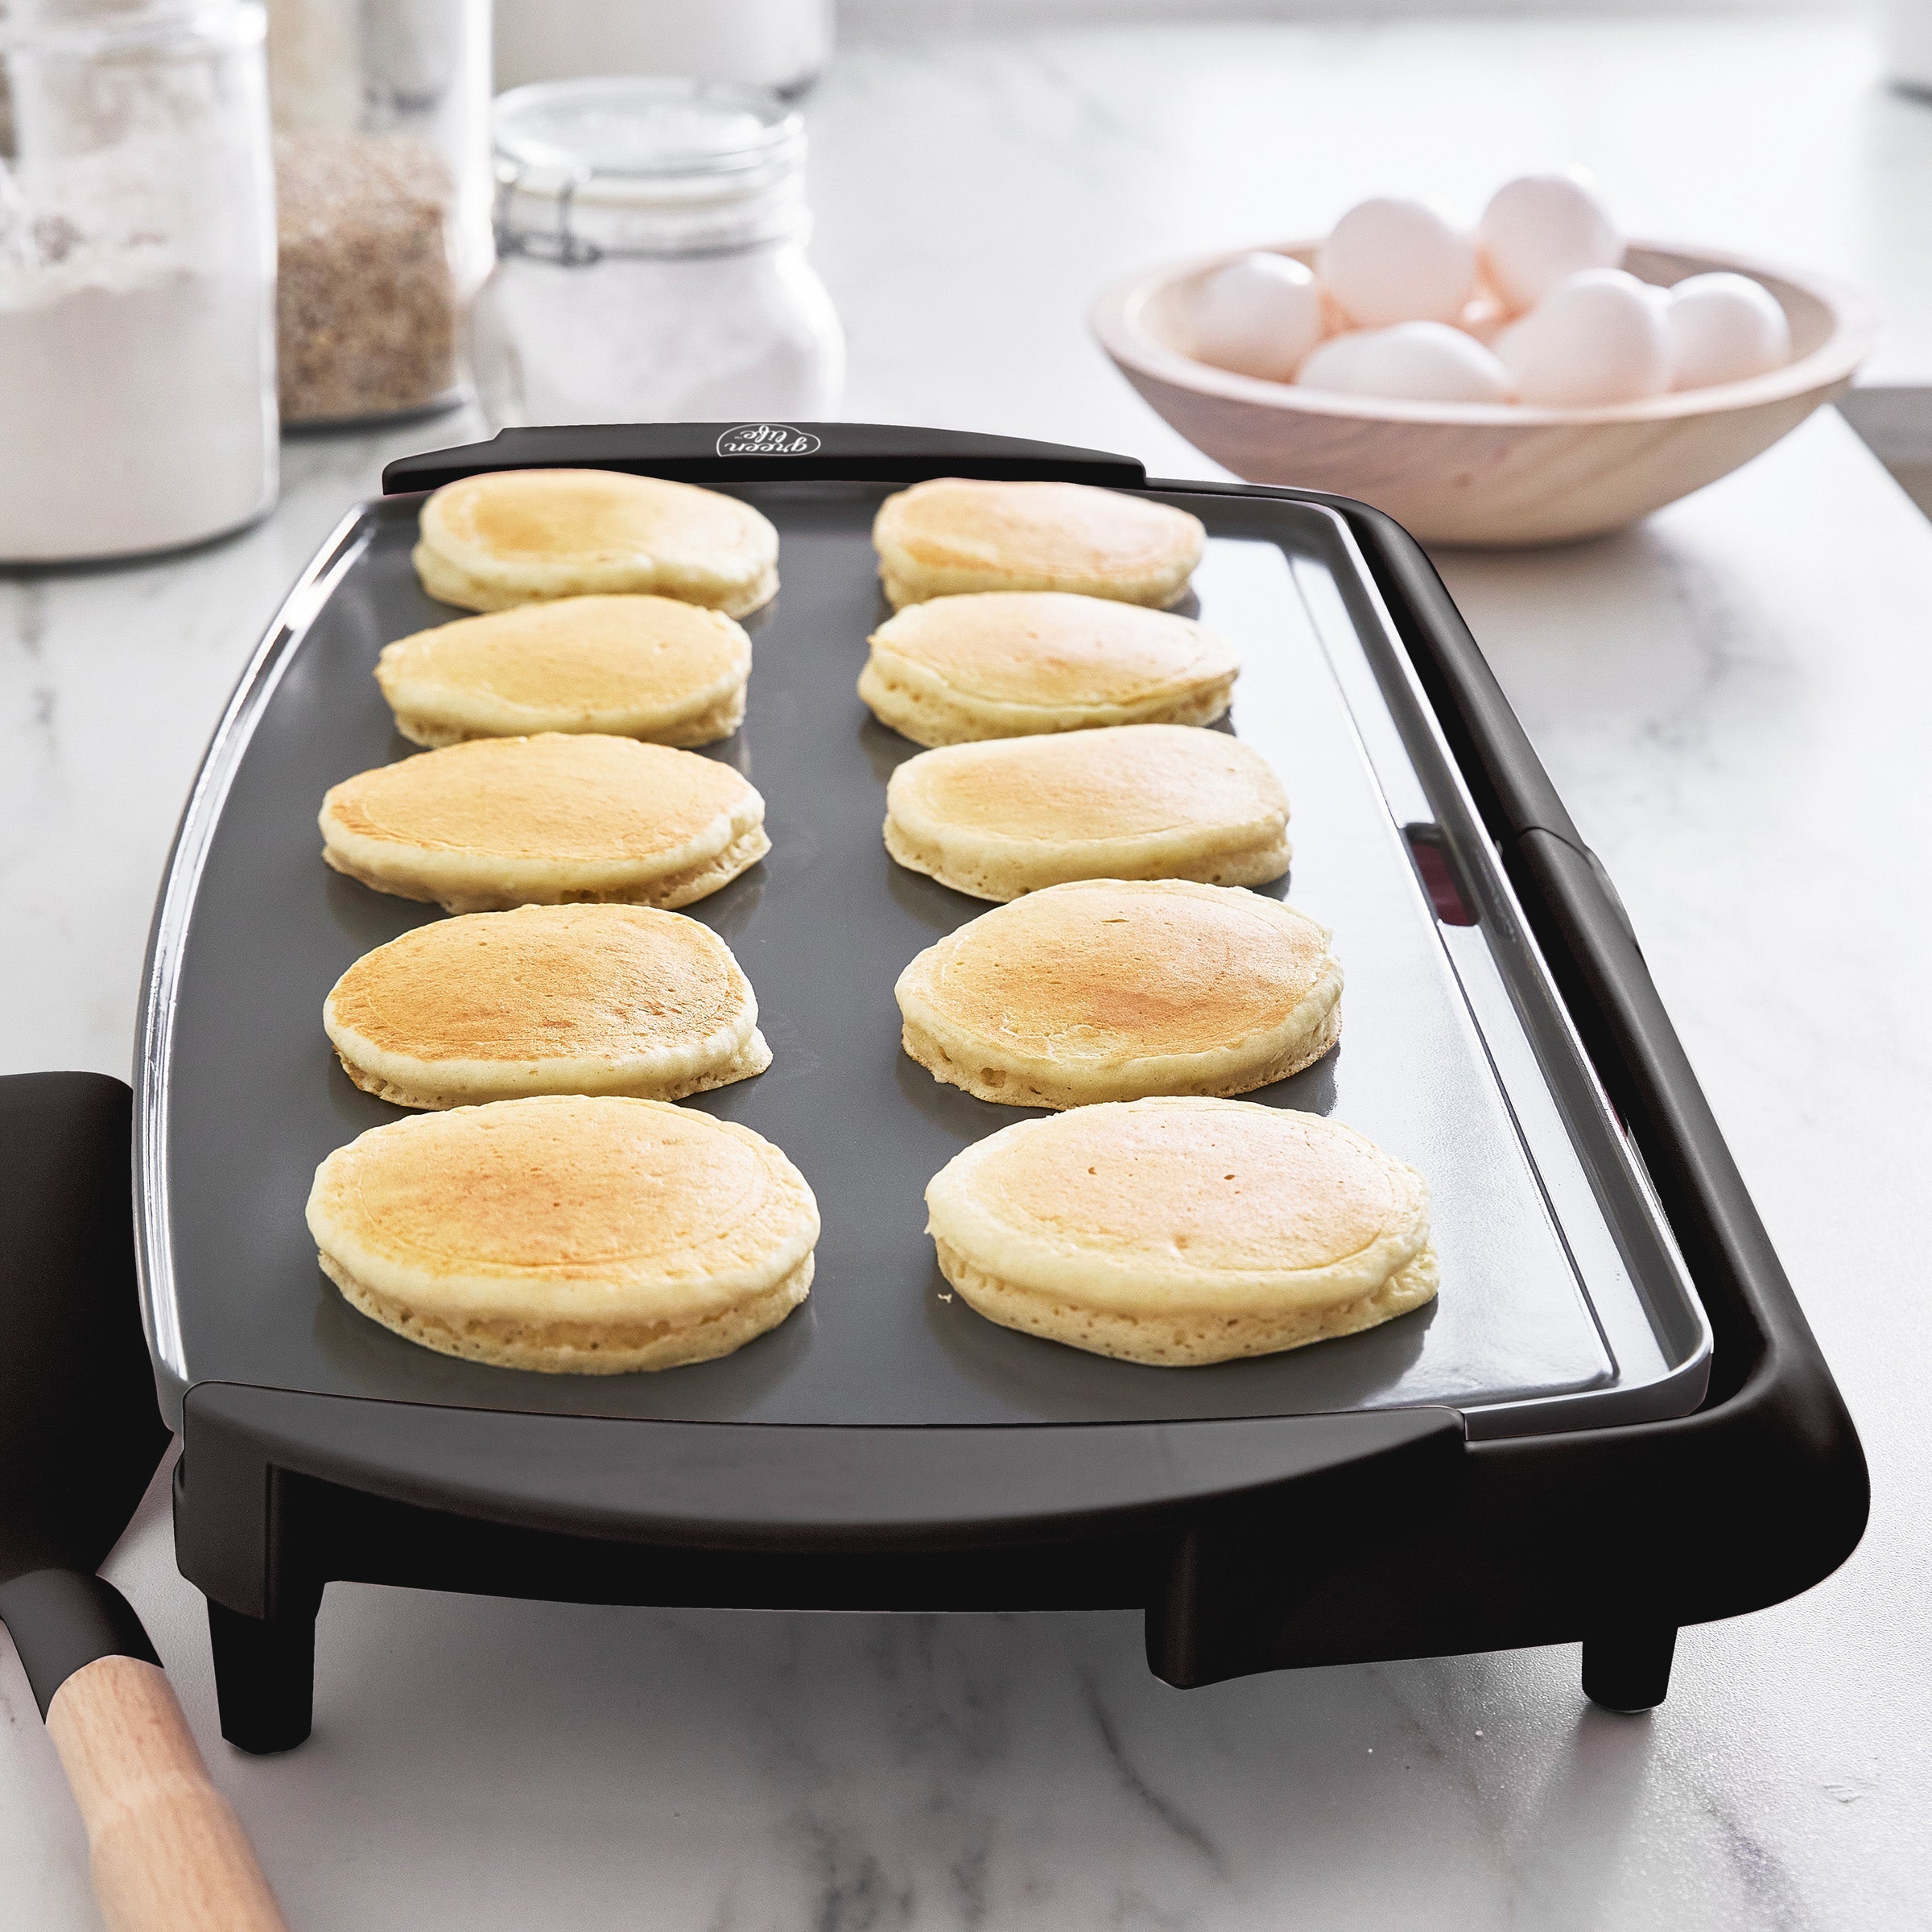 GreenLife Healthy Ceramic Nonstick, Extra Large 20 Electric Griddle For  Pancakes Eggs Burgers And More & Reviews